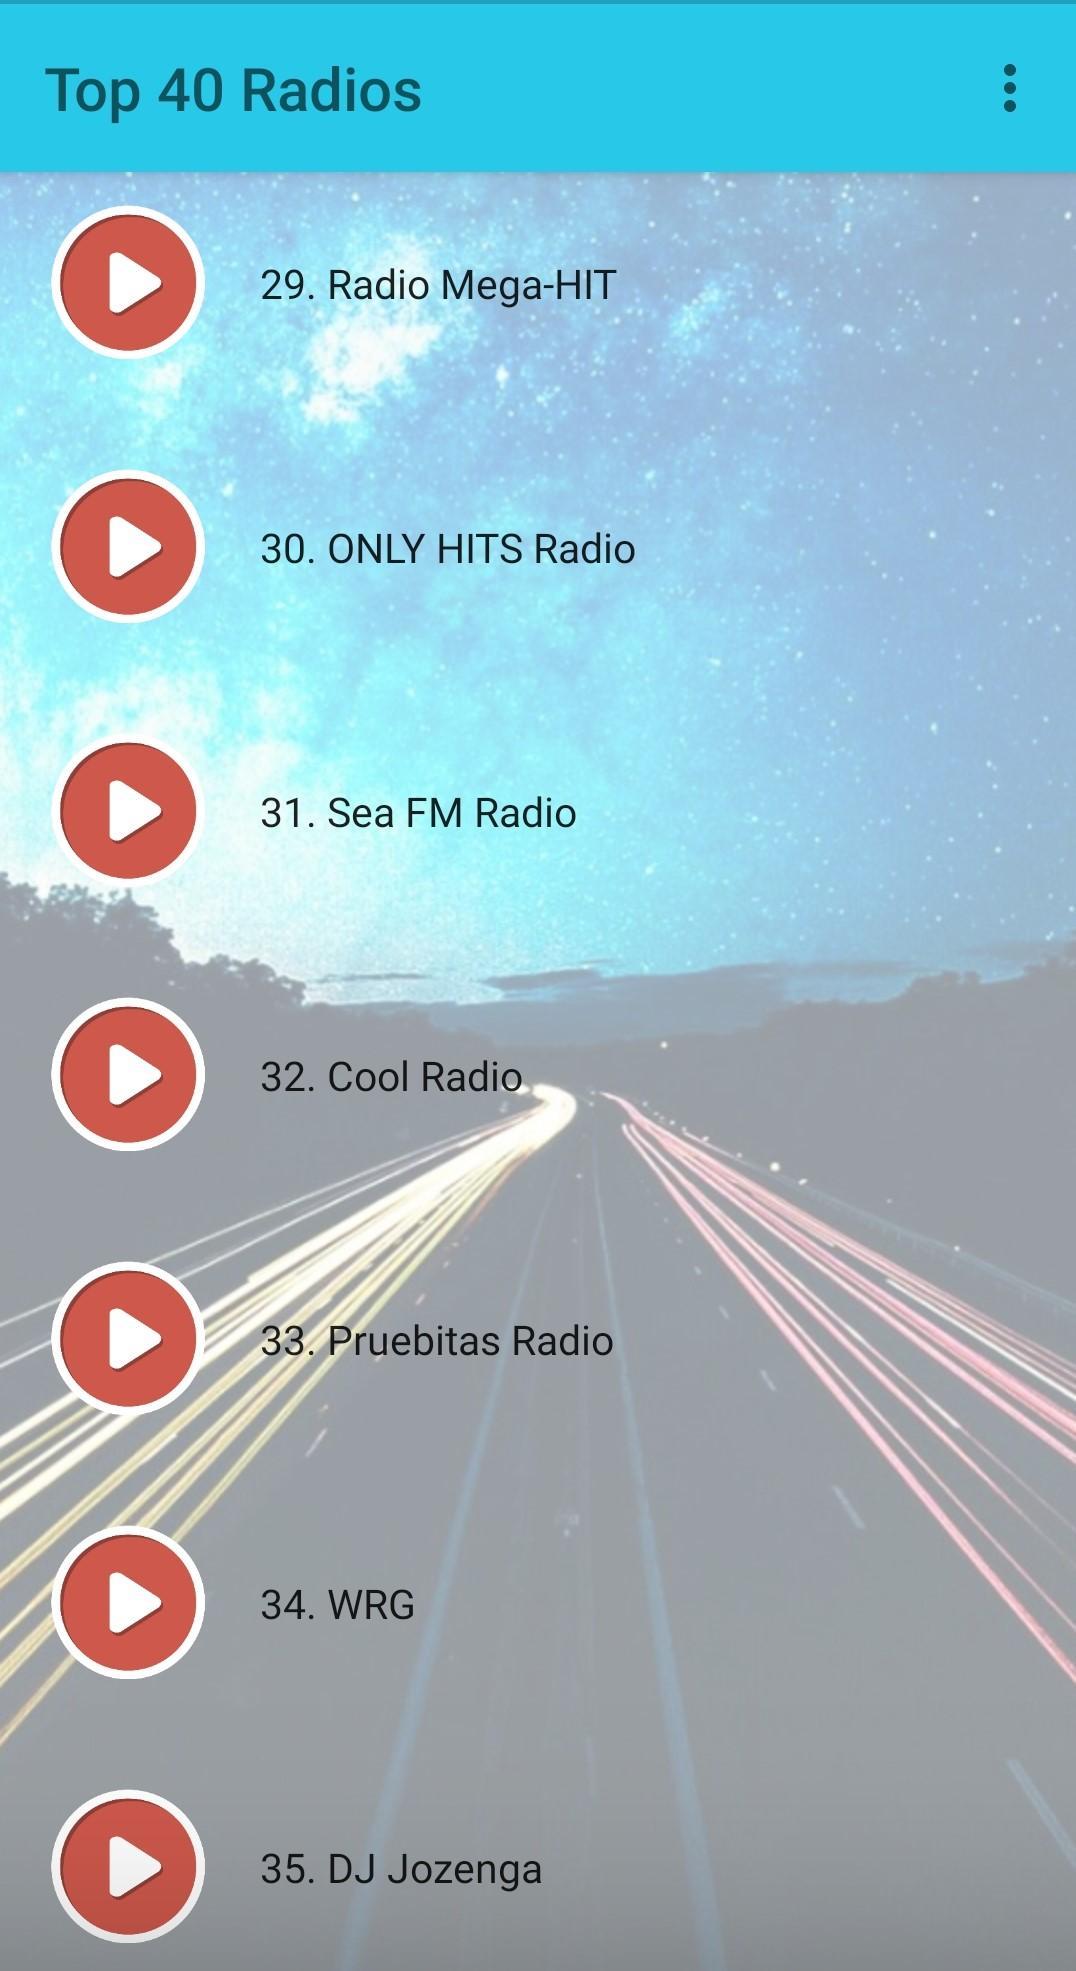 Top 40 Radio for Android - APK Download